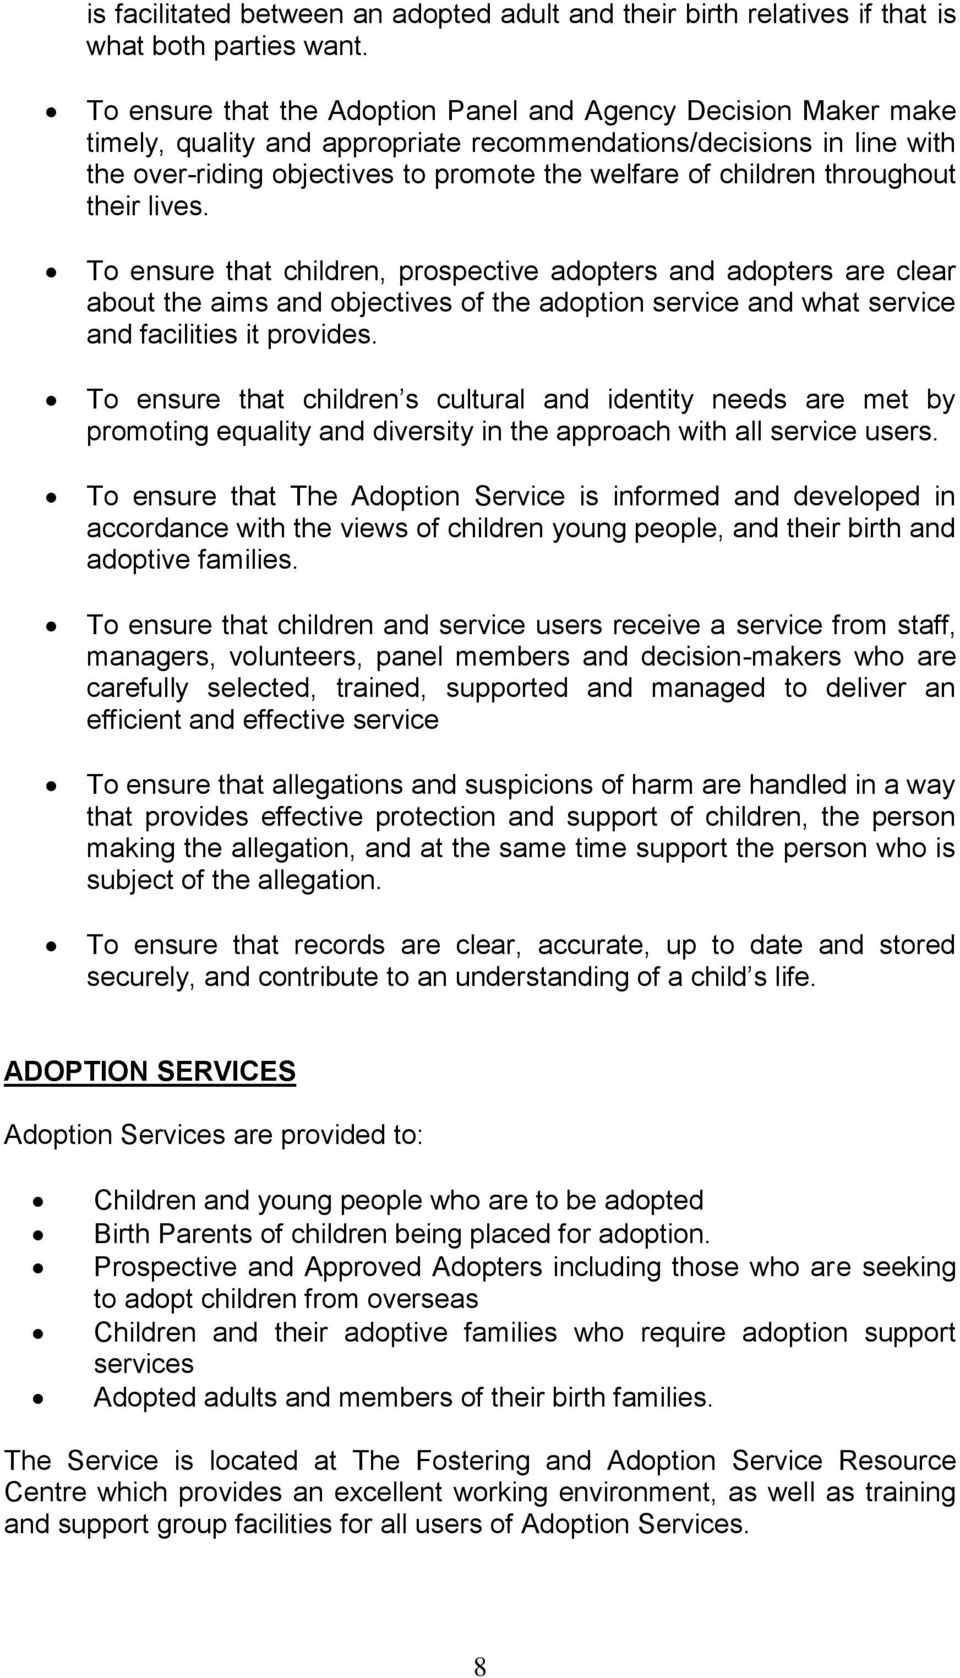 throughout their lives. To ensure that children, prospective adopters and adopters are clear about the aims and objectives of the adoption service and what service and facilities it provides.